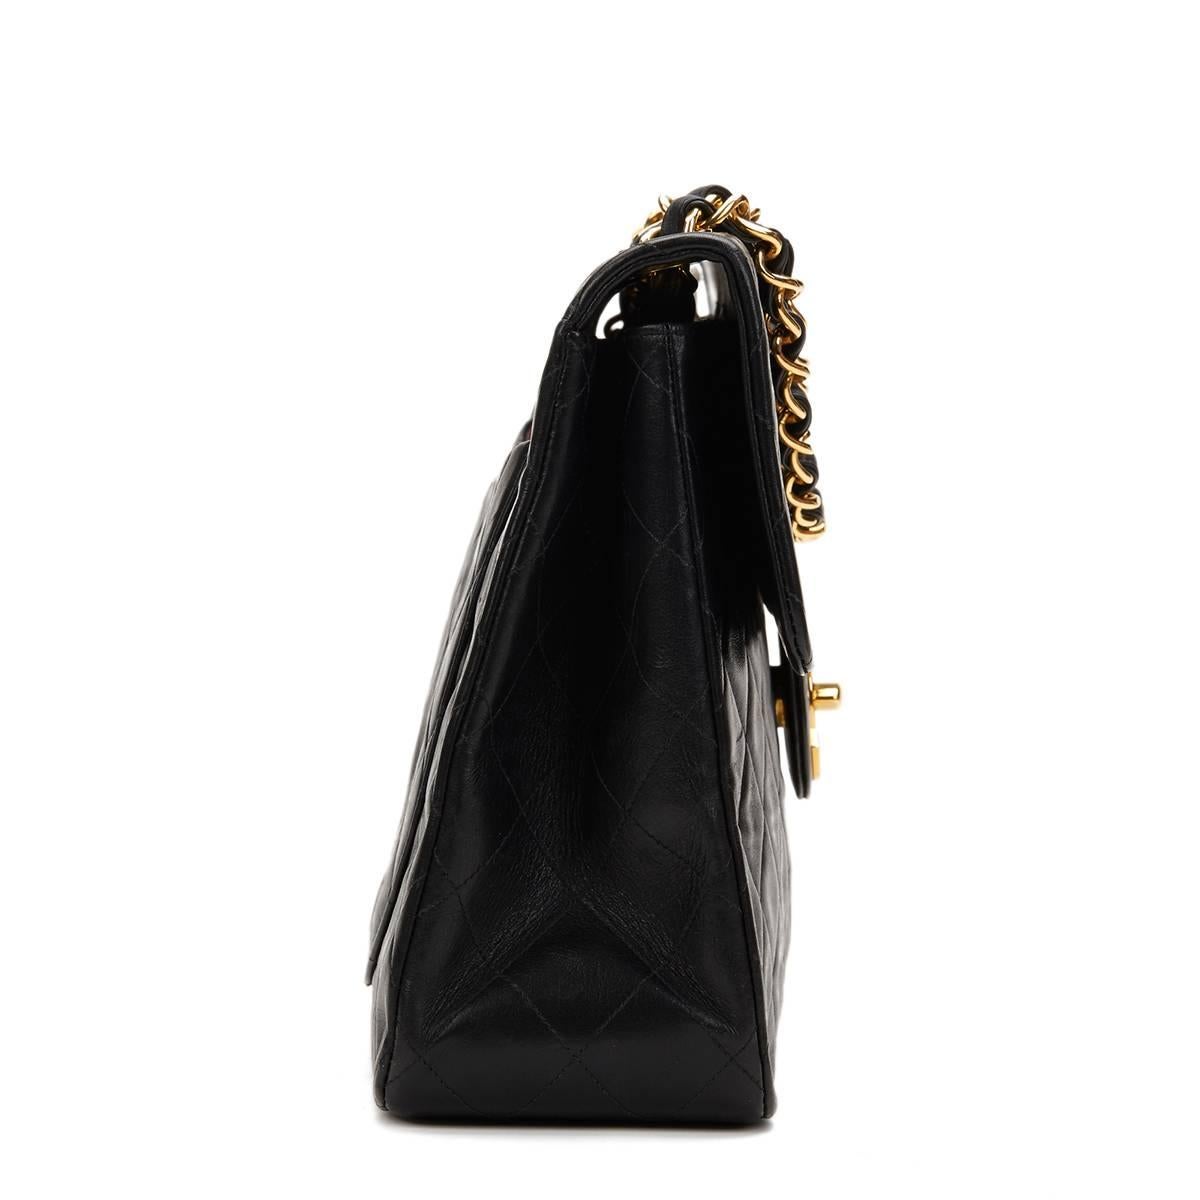 CHANEL
Black Quilted Lambskin Vintage Maxi Jumbo XL Flap Bag

This CHANEL Maxi Jumbo XL Flap Bag is in Very Good Pre-Owned Condition. Circa 1994. Primarily made from Lambskin Leather complimented by Gold hardware. Our  reference is HB907 should you